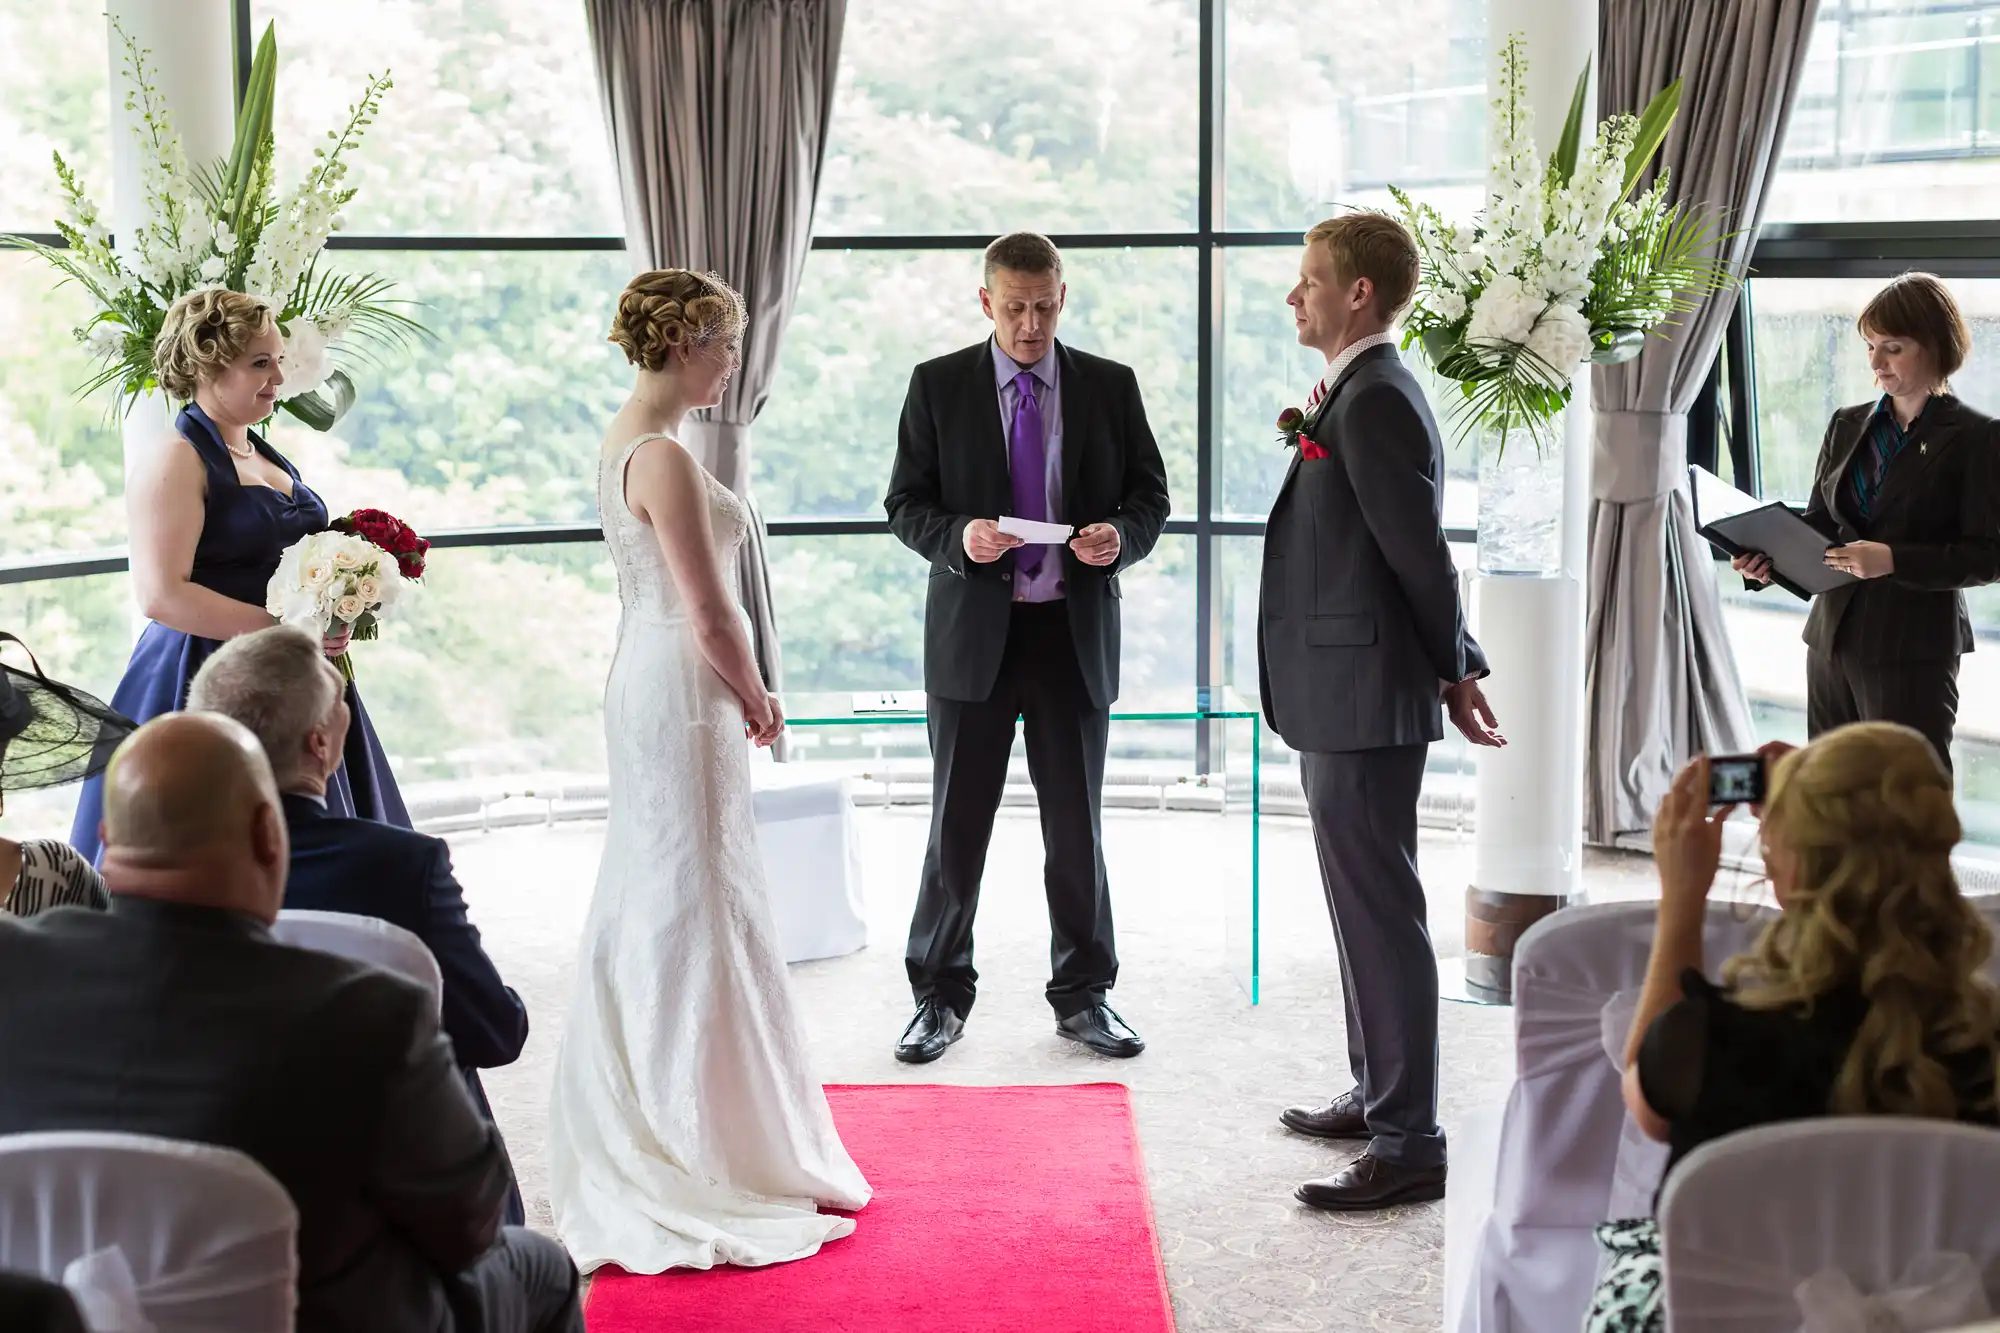 A wedding ceremony in a room with large windows, featuring a bride and a groom facing each other, an officiant reading, and guests watching.